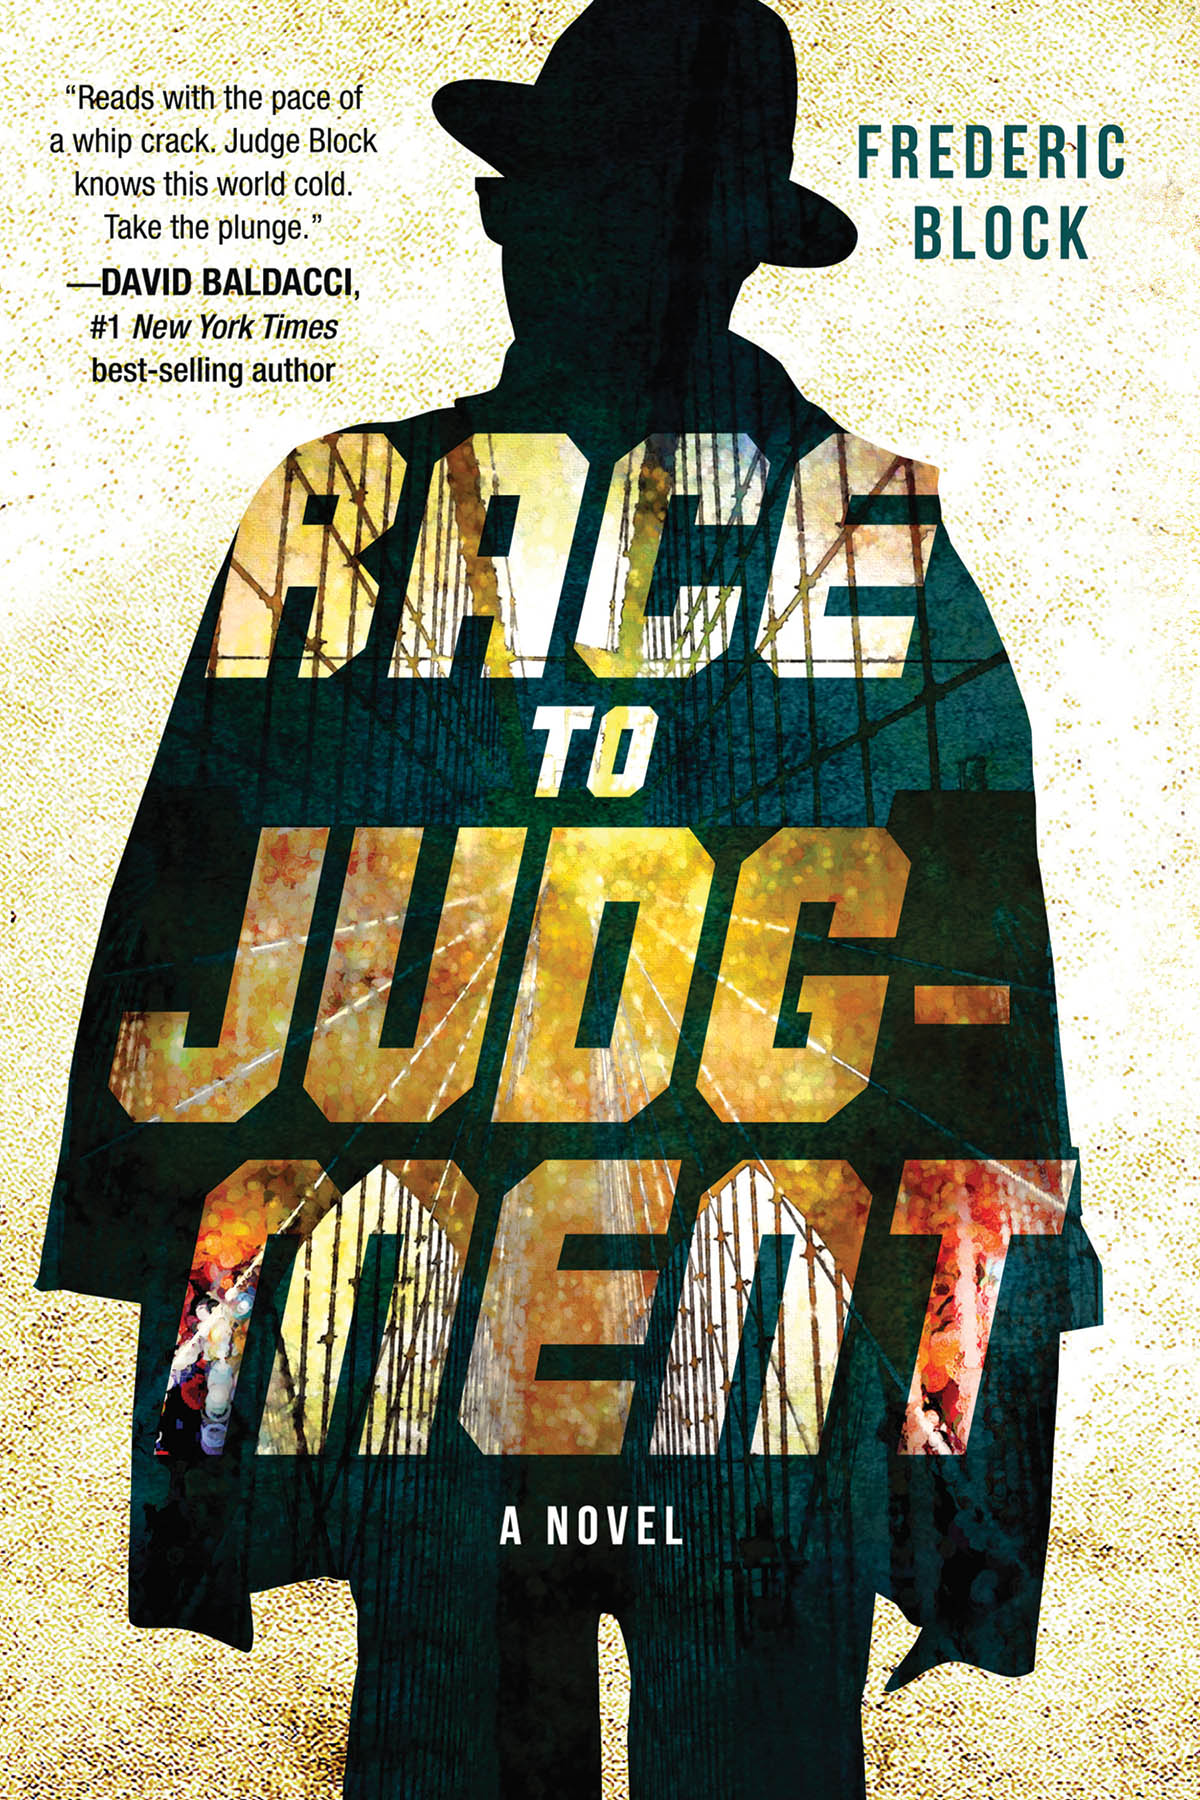 Block_Frederic_Race_to_Judgement_Book_Cover_Art